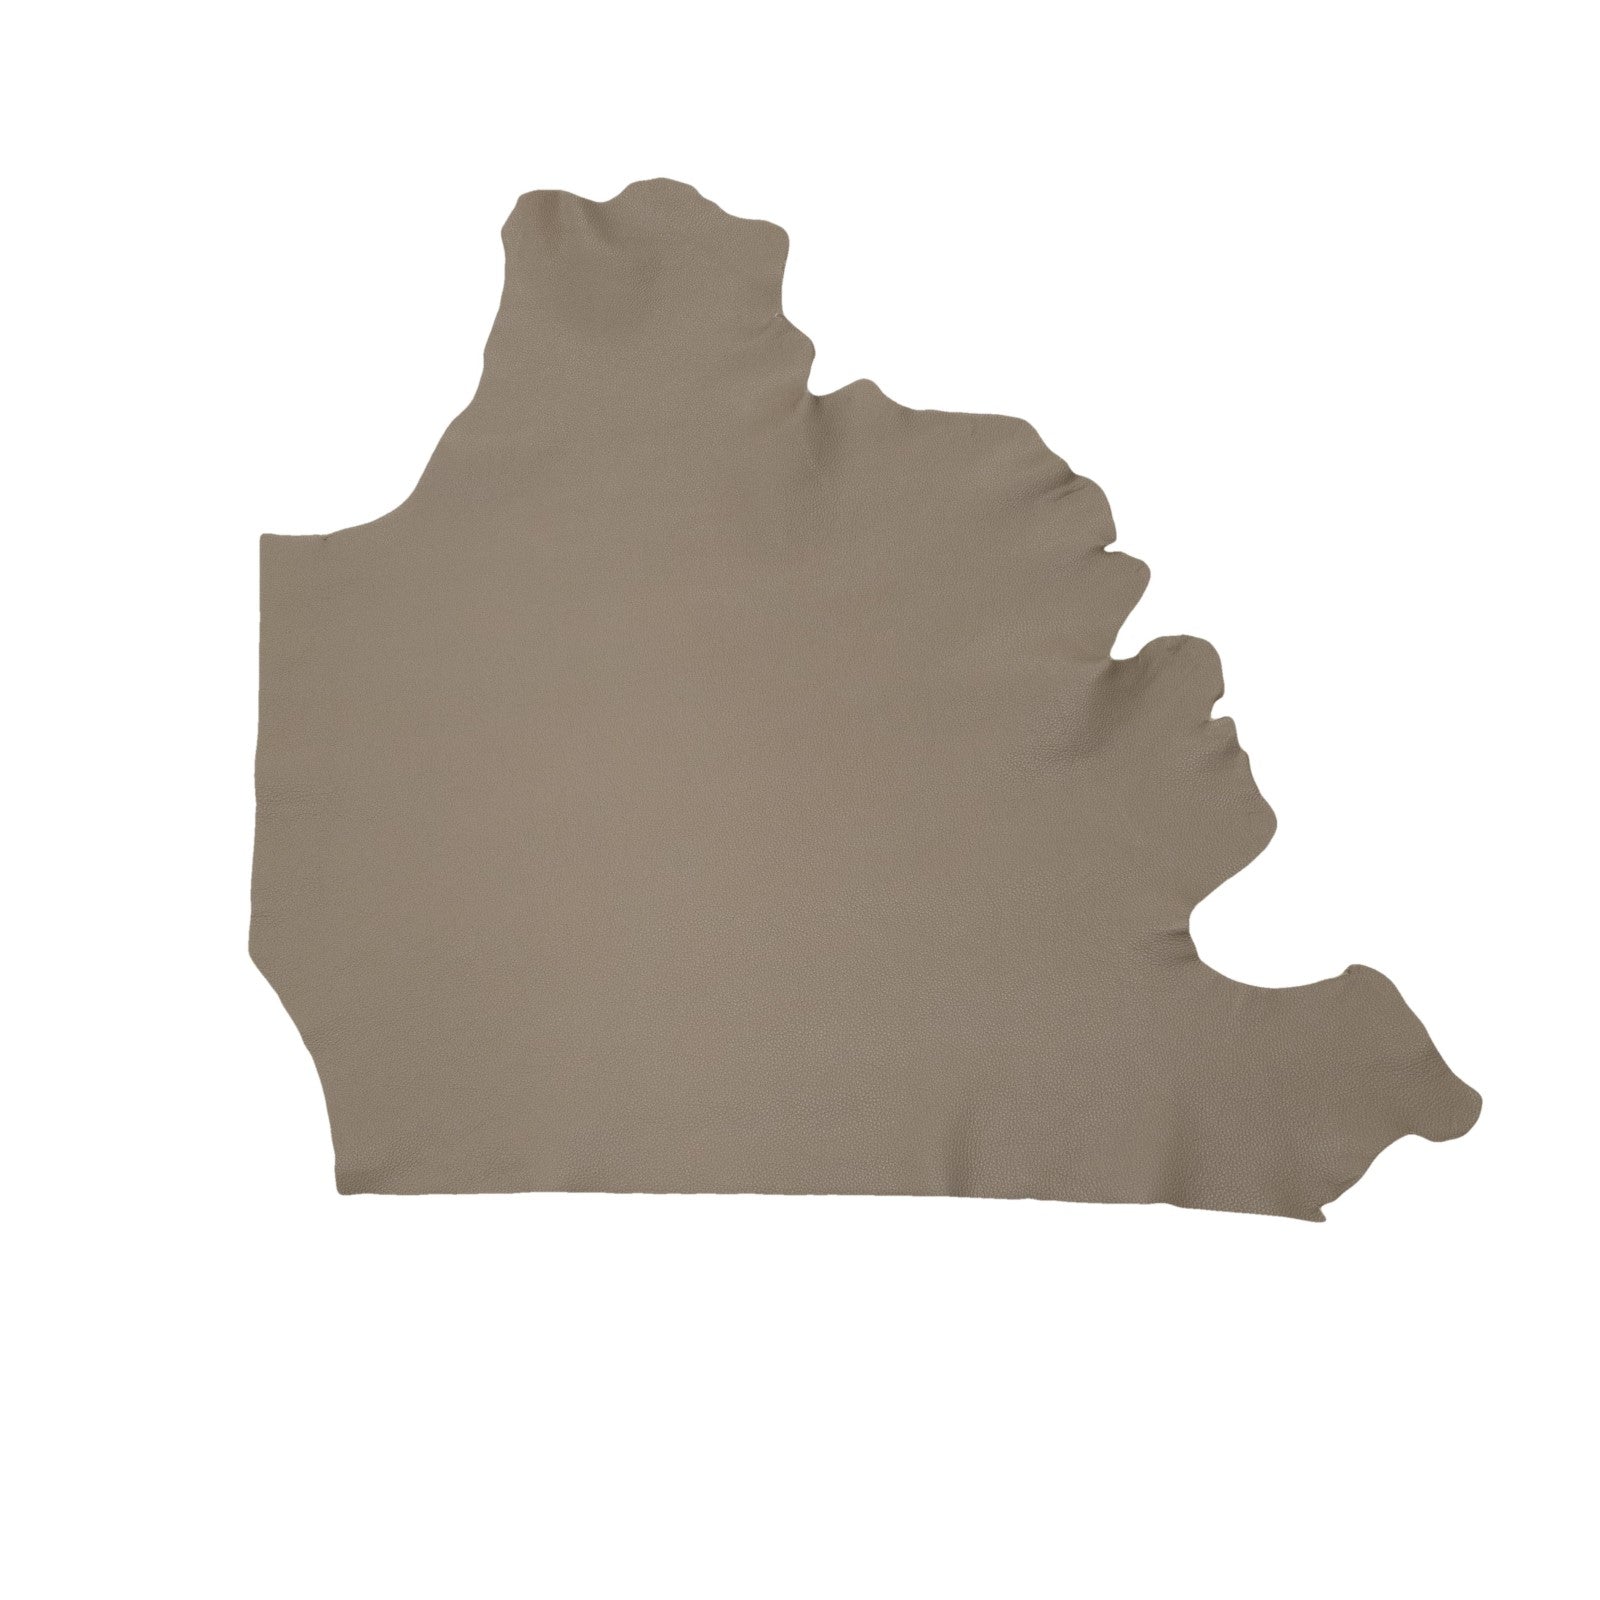 Tan Lines Taupe, Tried n True, Summer Edition,  3-4 oz Leather Cow Hides, 6.5-7.5 Square Foot / Project Piece (Top) | The Leather Guy